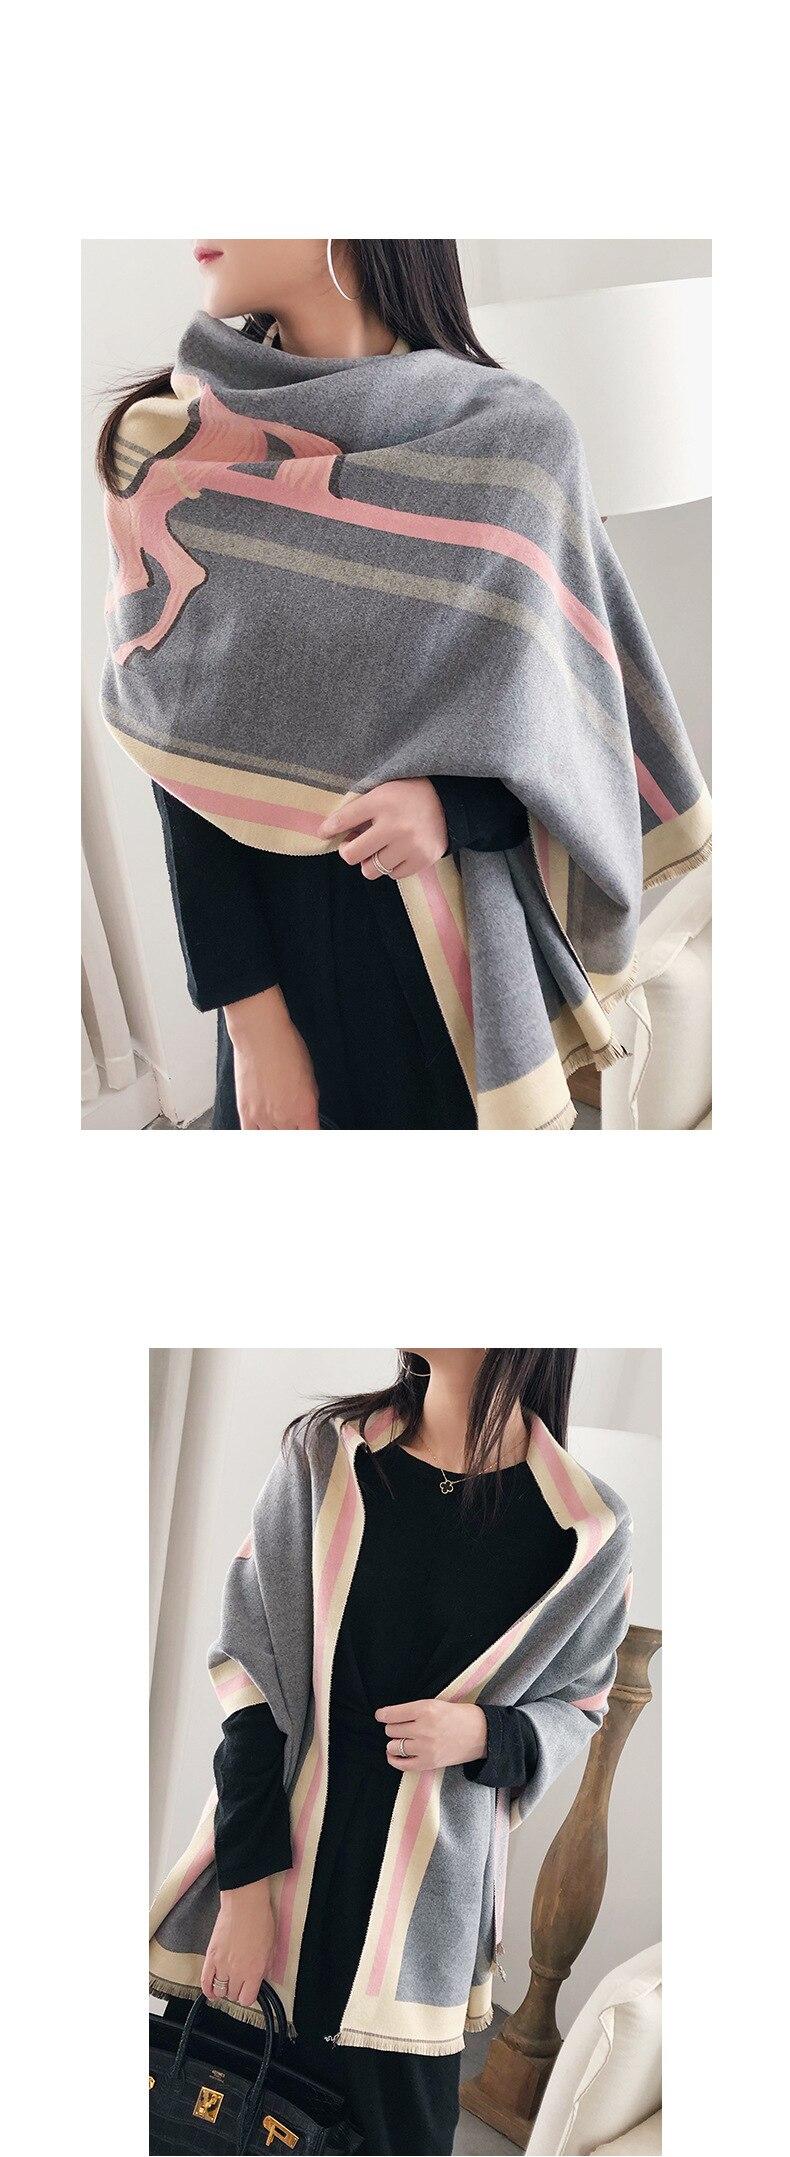 2020 Winter Scarf for Women Luxury Brand Horse Scarves Lady Thick Cashmere Warm Blanket Pashmina Shawls Warps Stole